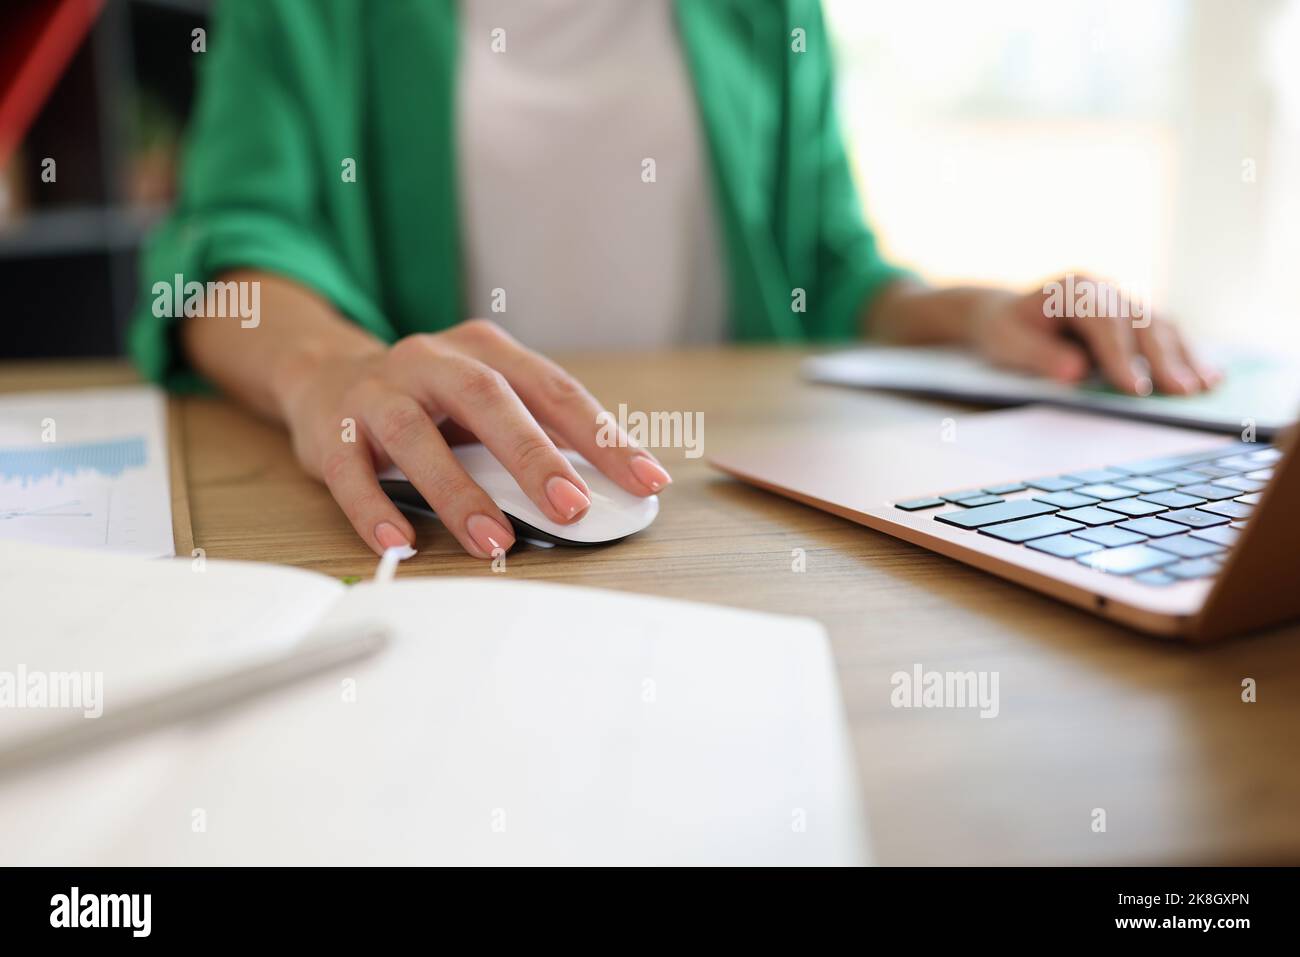 Female working on modern laptop in office Stock Photo